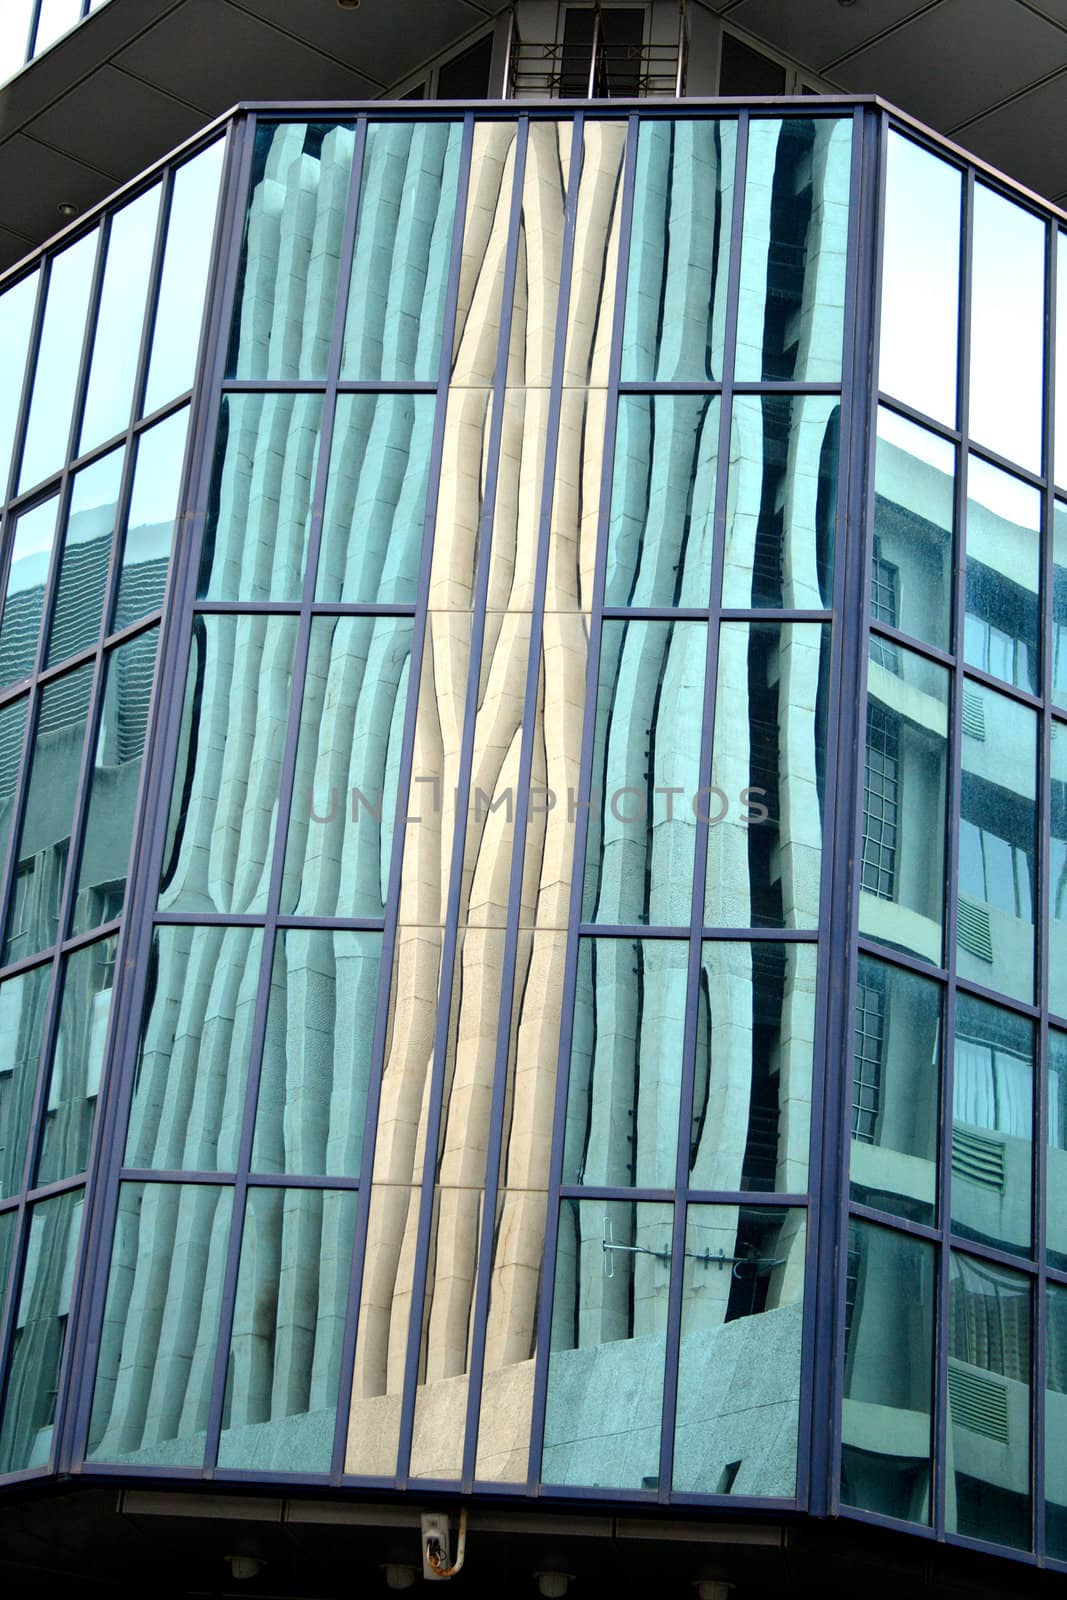 Reflection in the large glass panels of a modern building